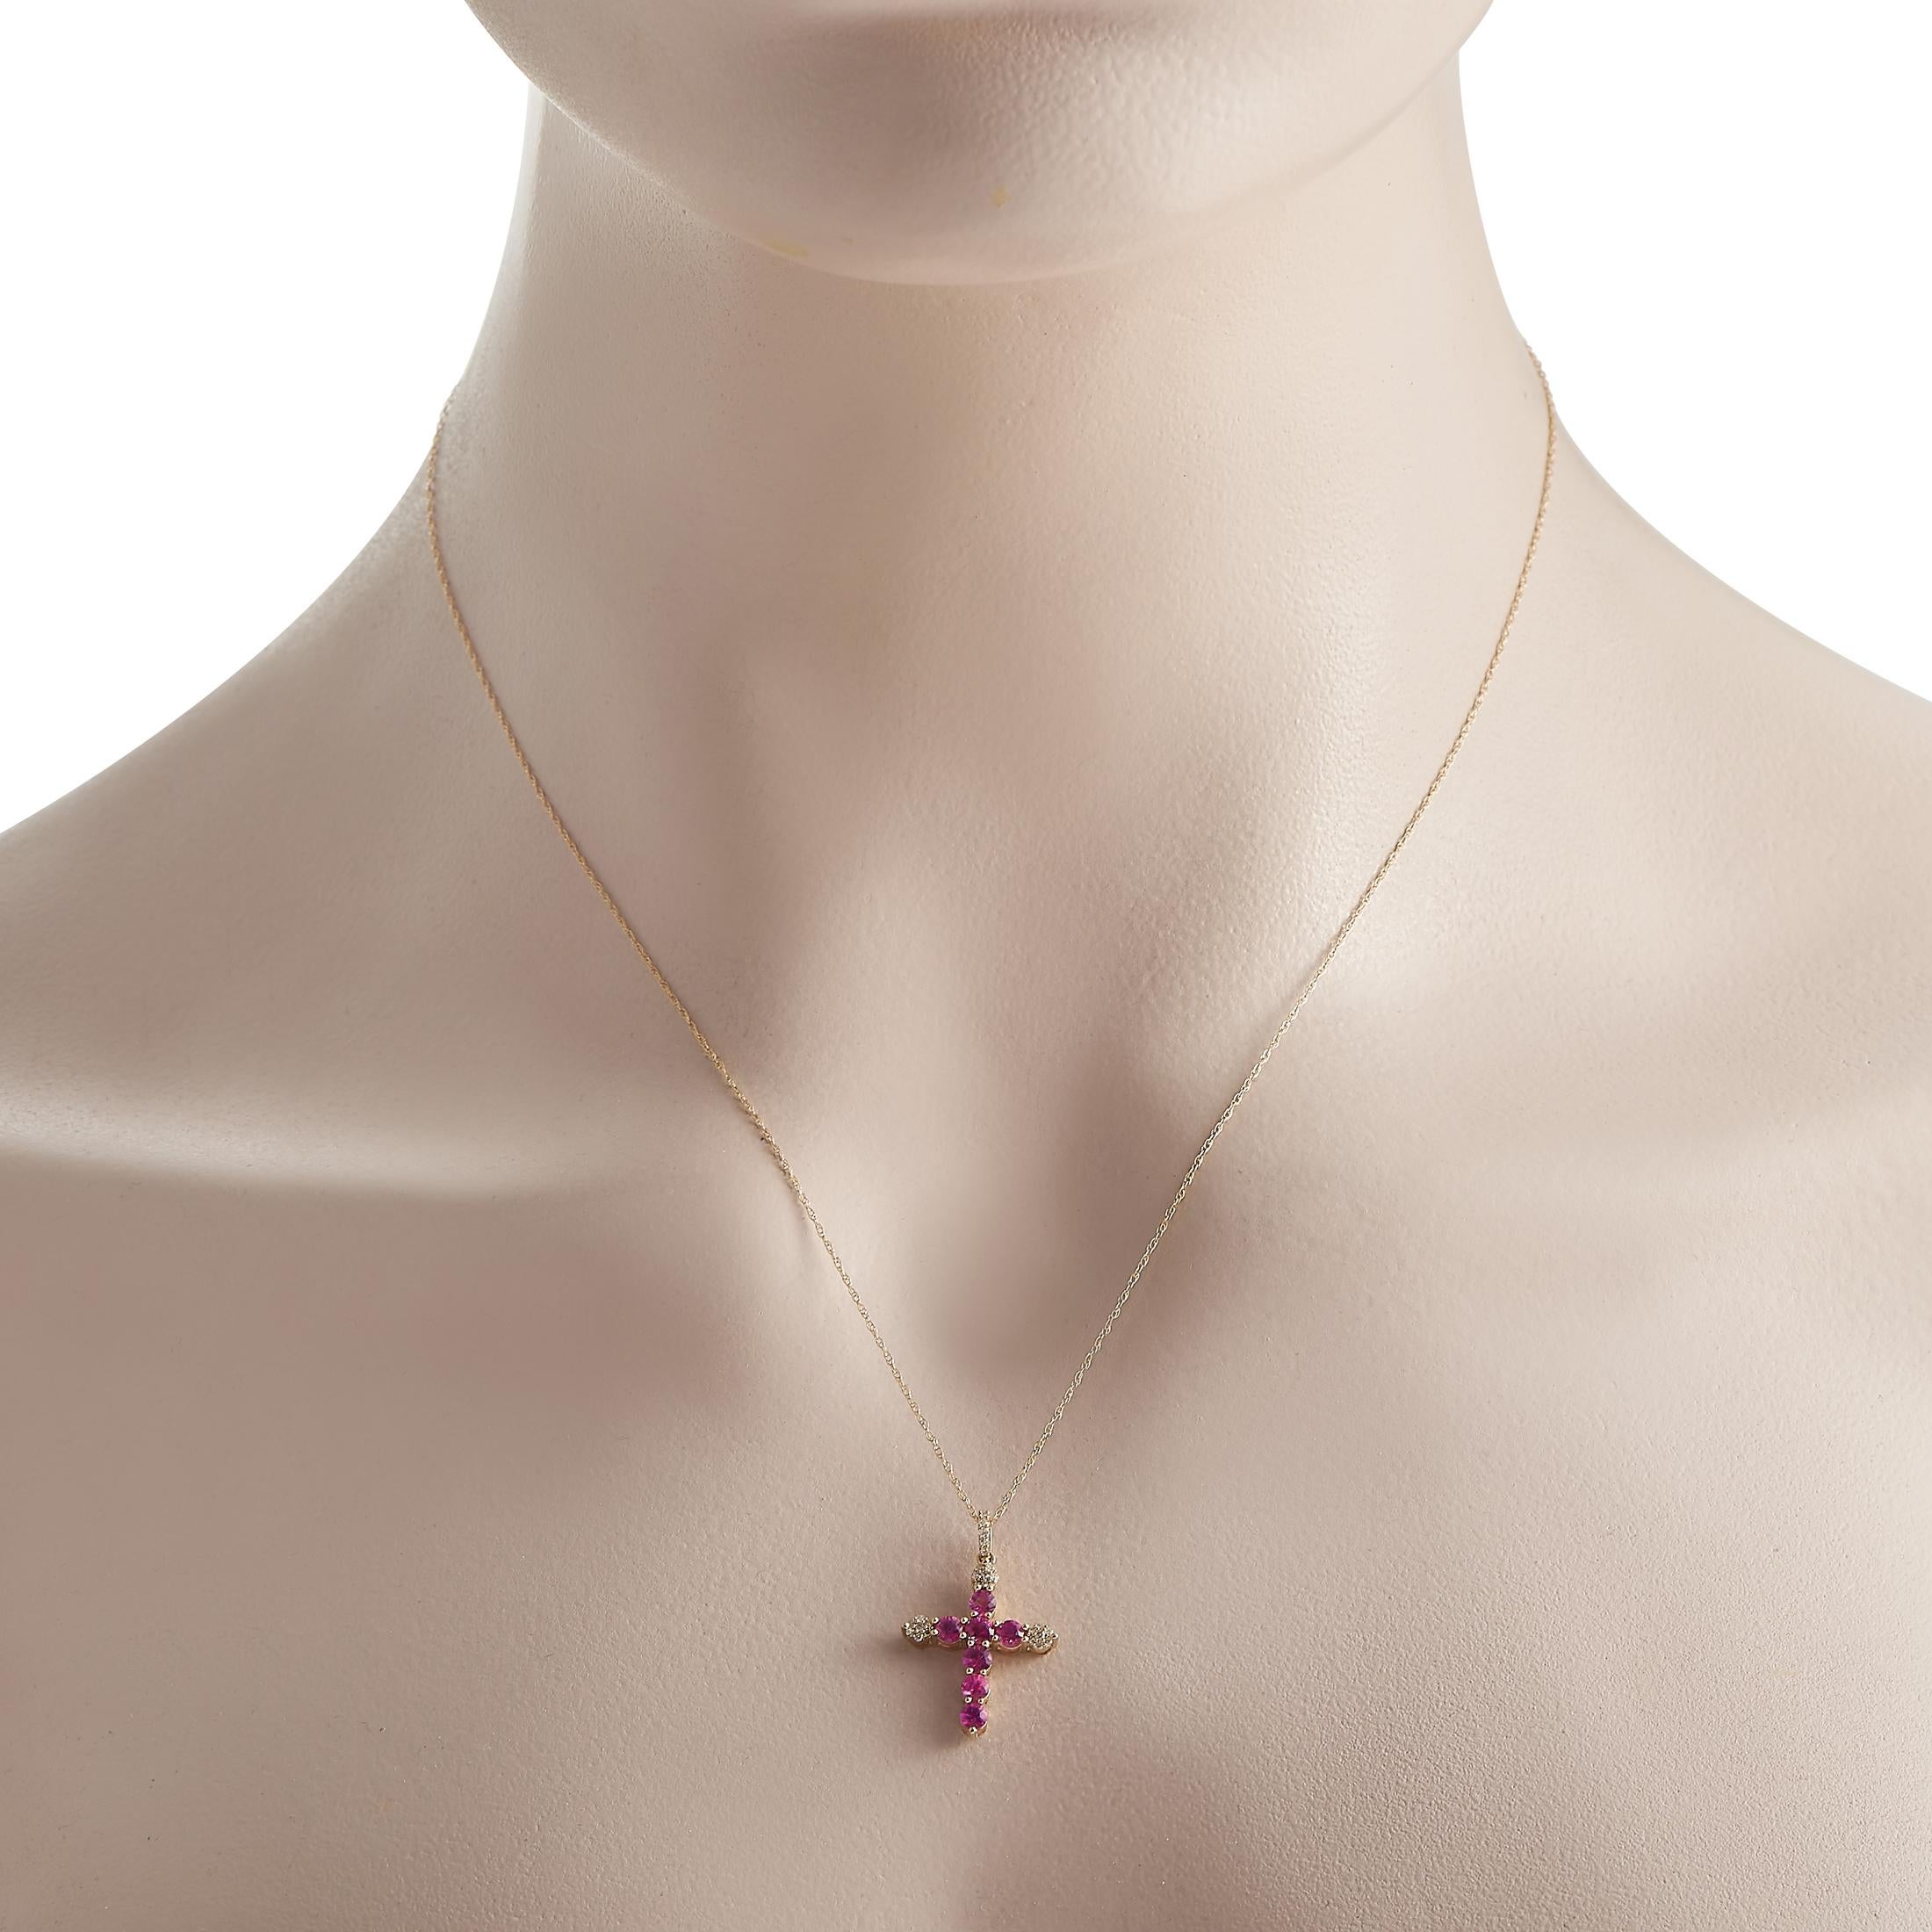 Celebrate your faith with this radiant cross necklace. An piece, the 17-long double-link tace chain and the 1x0.55 pendant are made of 14K yellow gold. The pendant has a scalloped profile bearing seven pink sapphires and clusters of petite